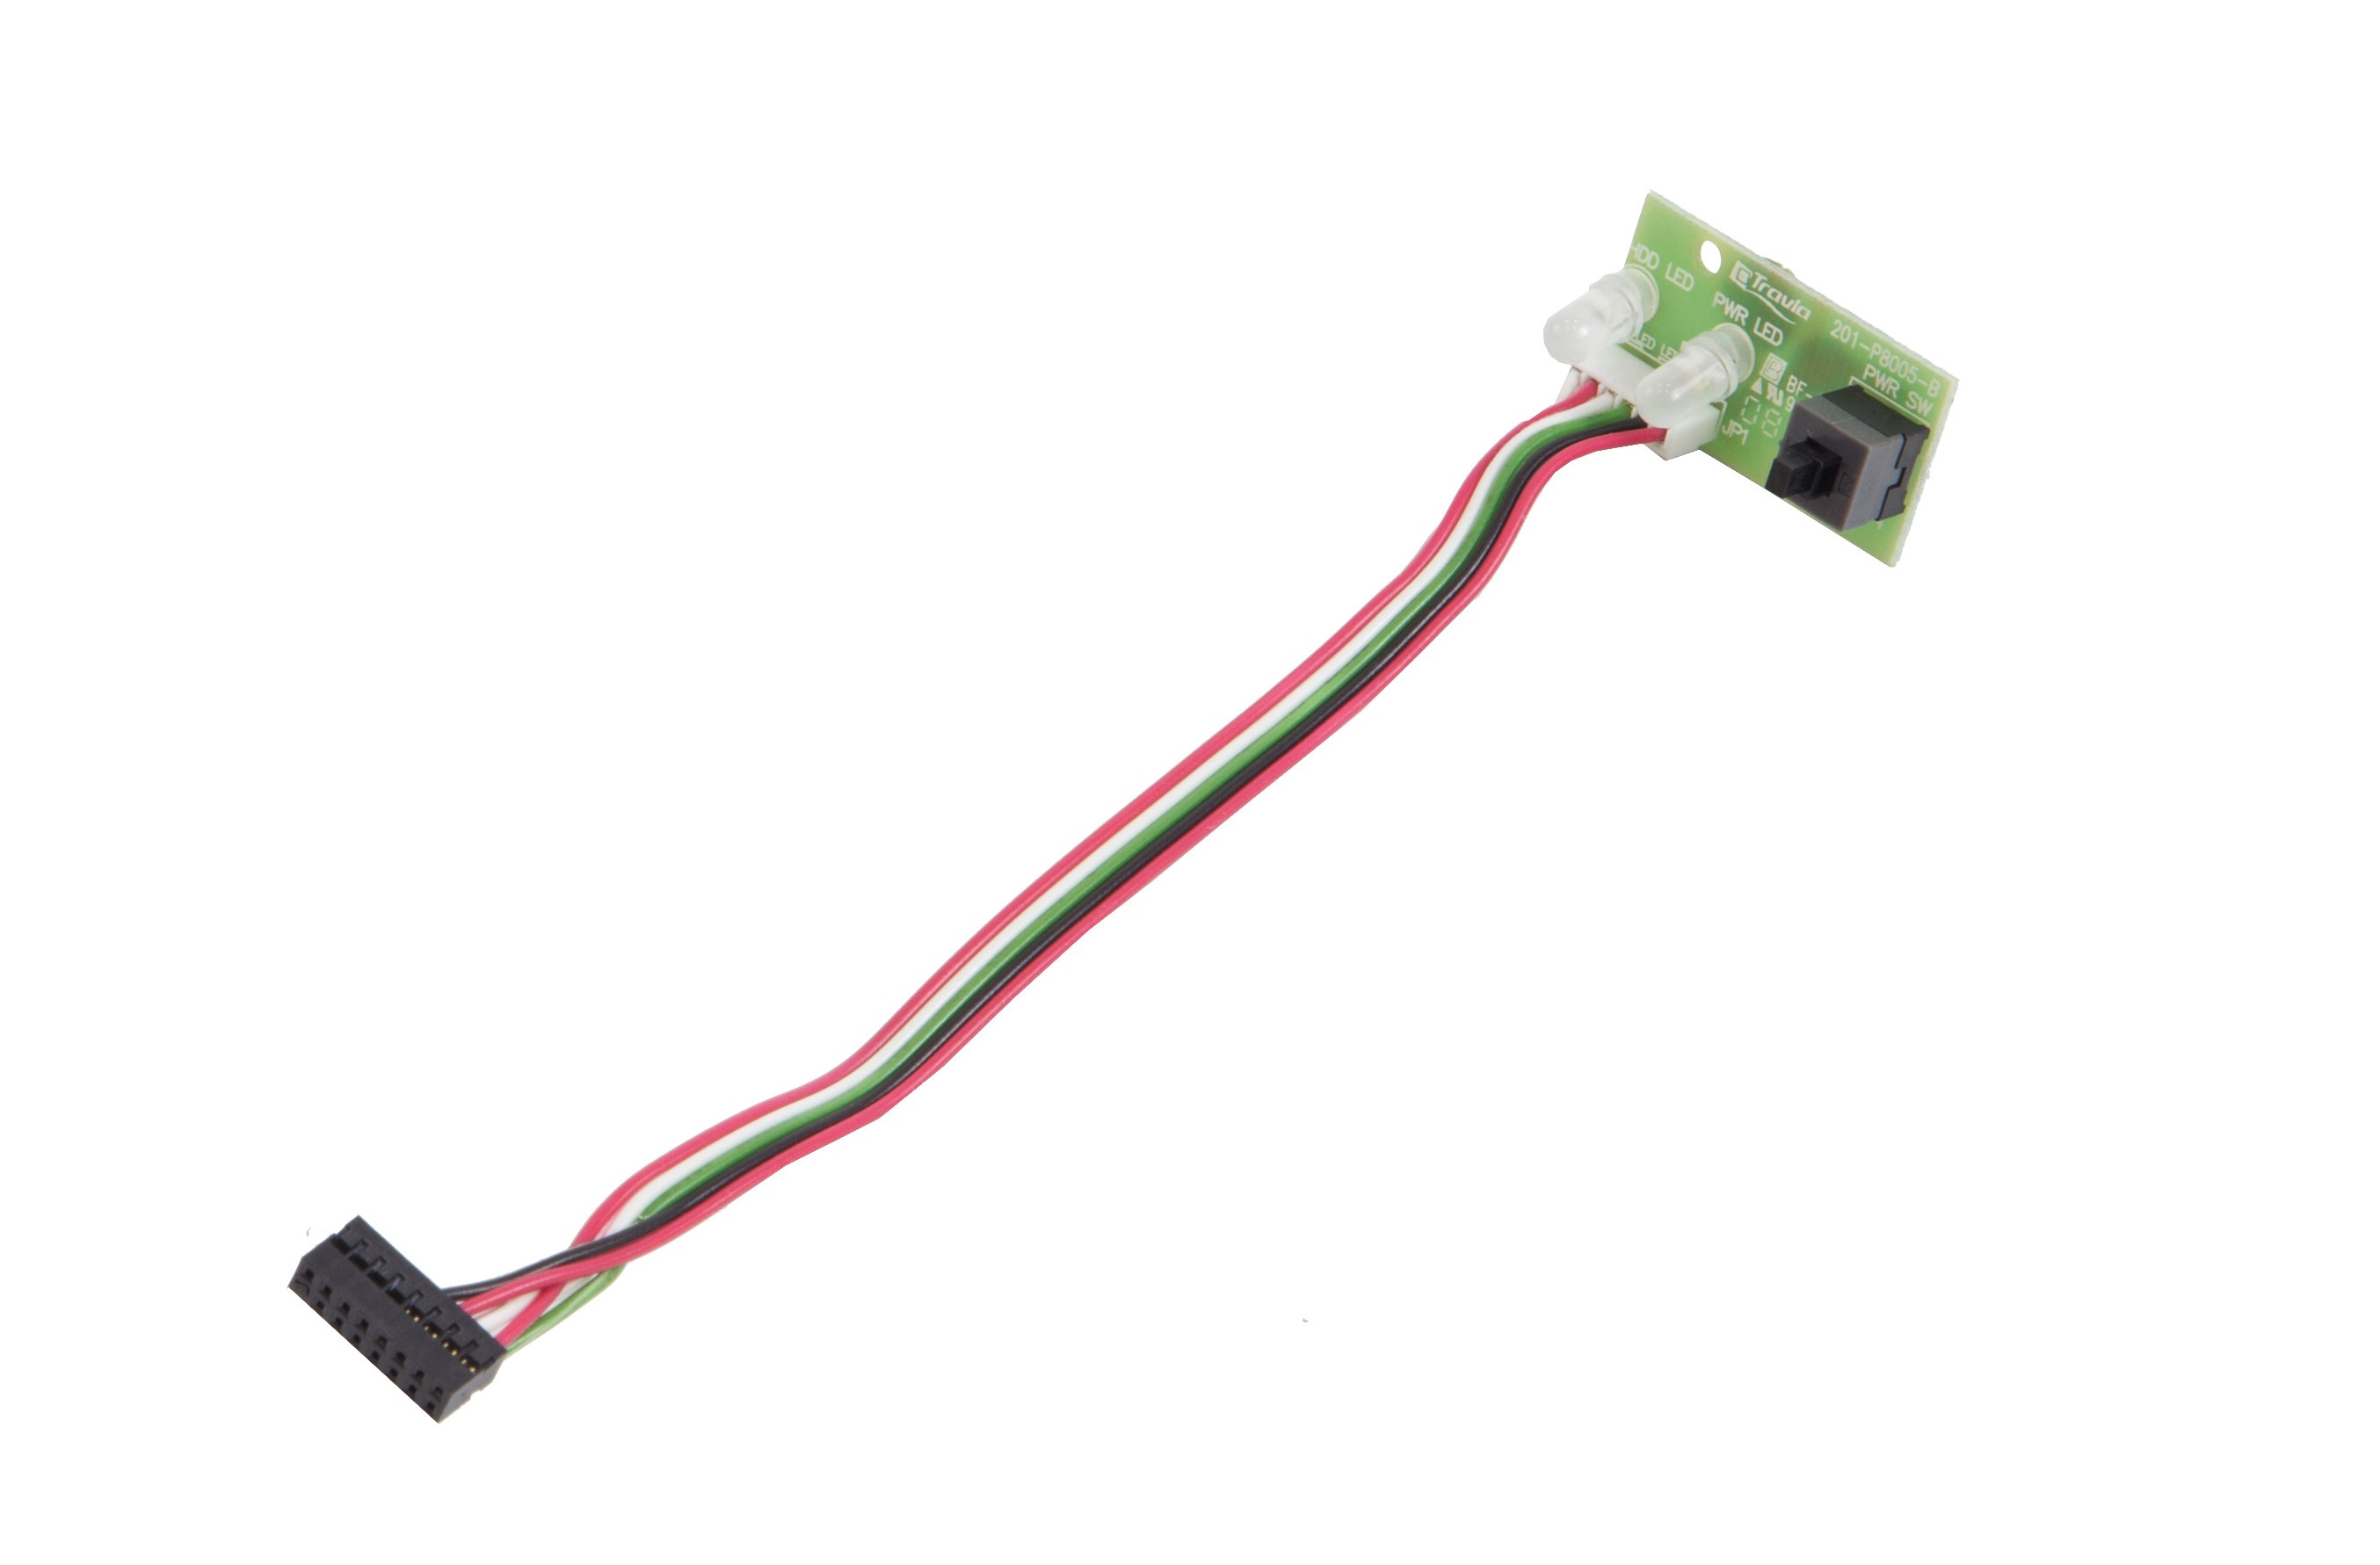 SW BOARD+150mm CABLE  |Products|Accessories|Others